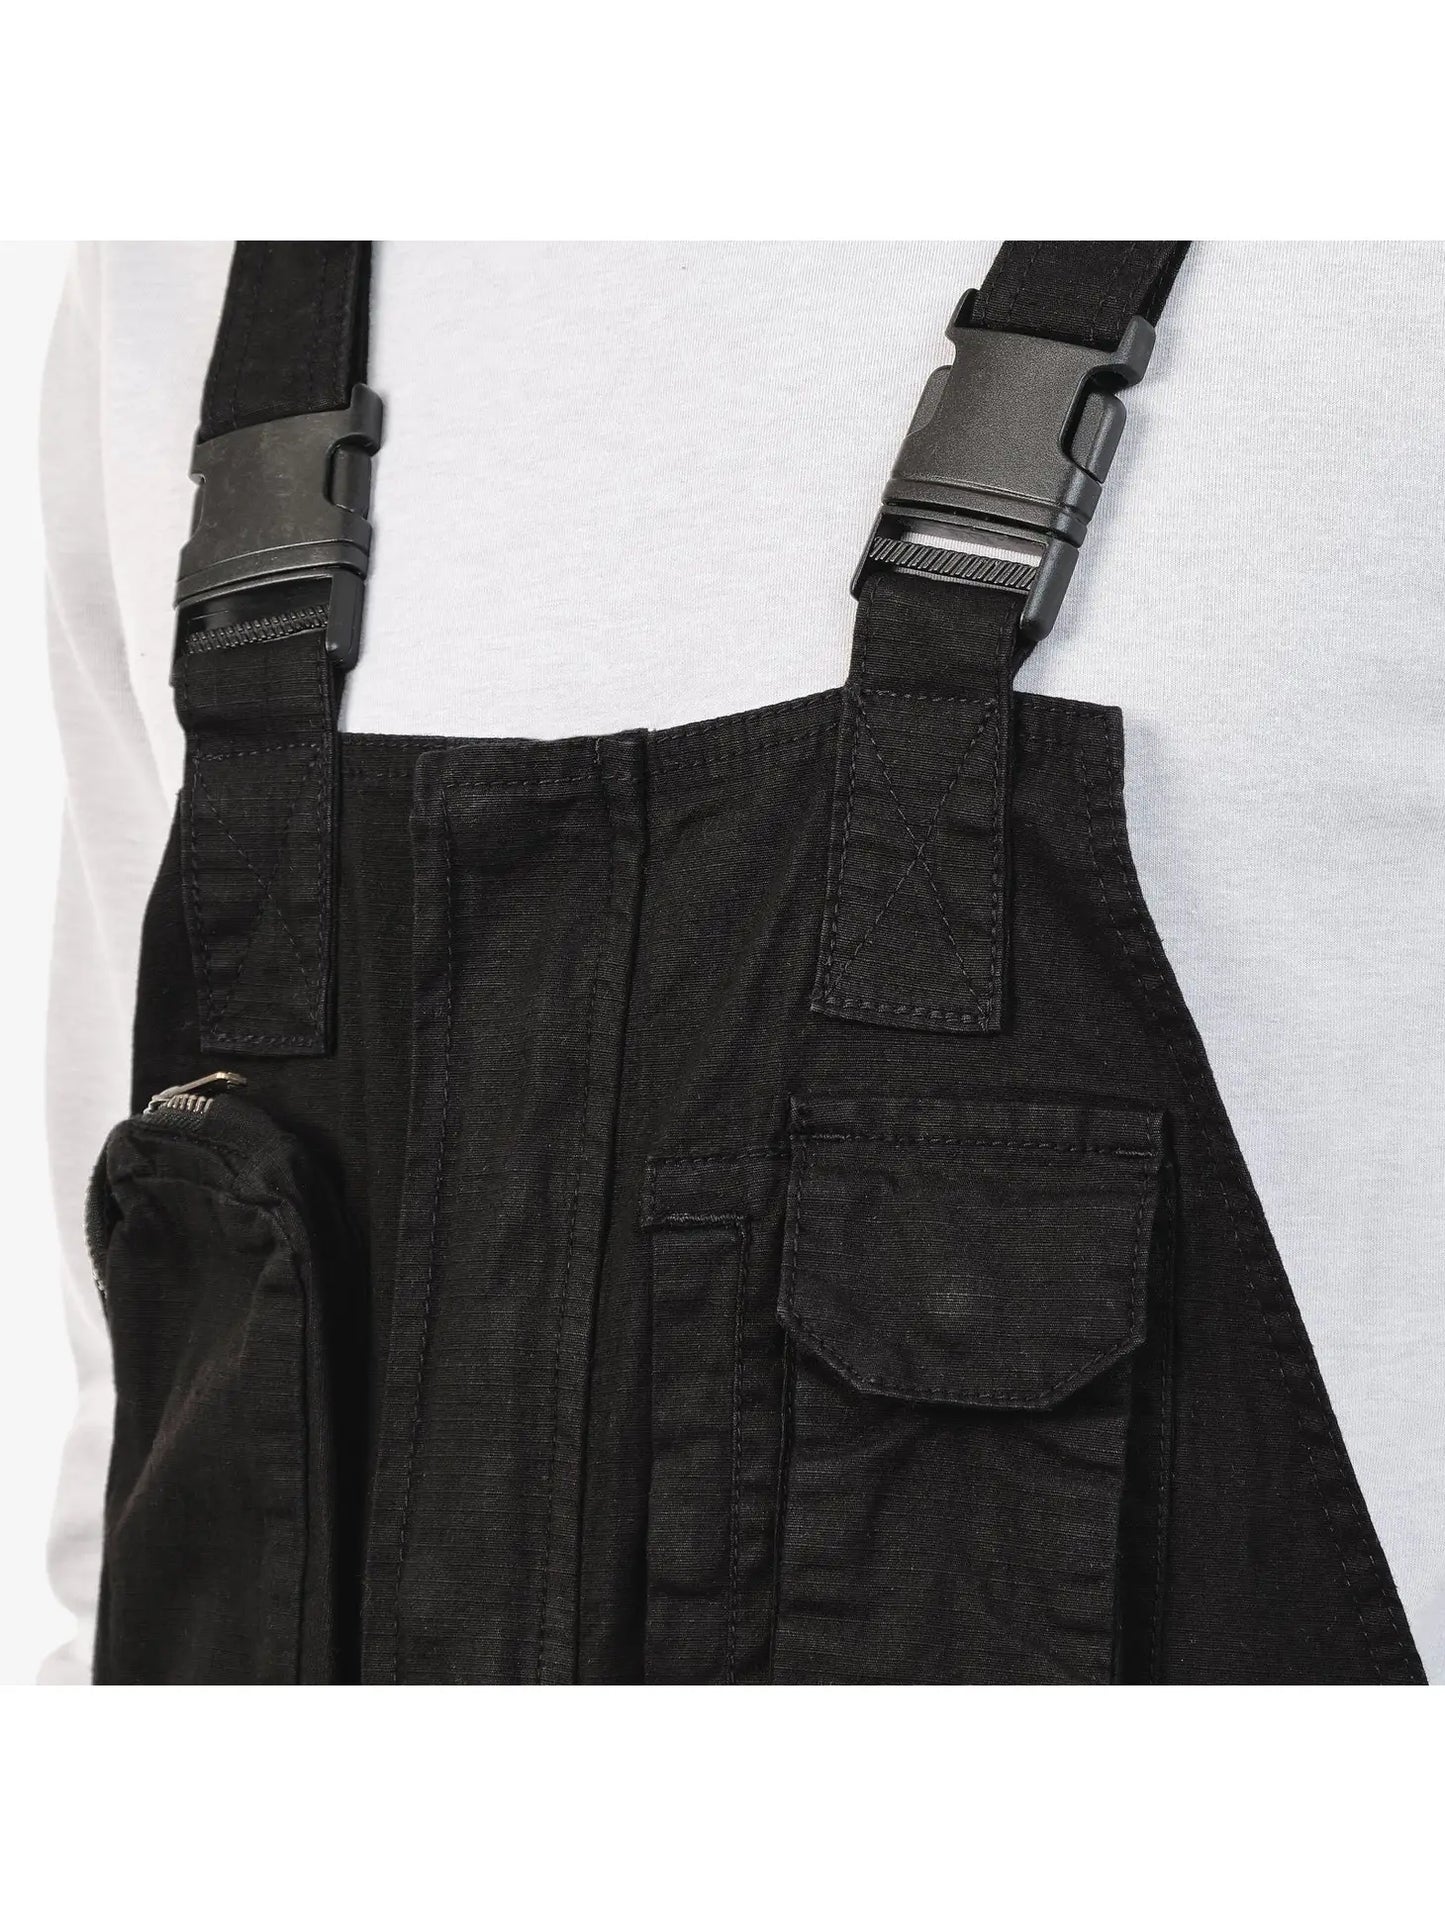 Obsidian Overalls